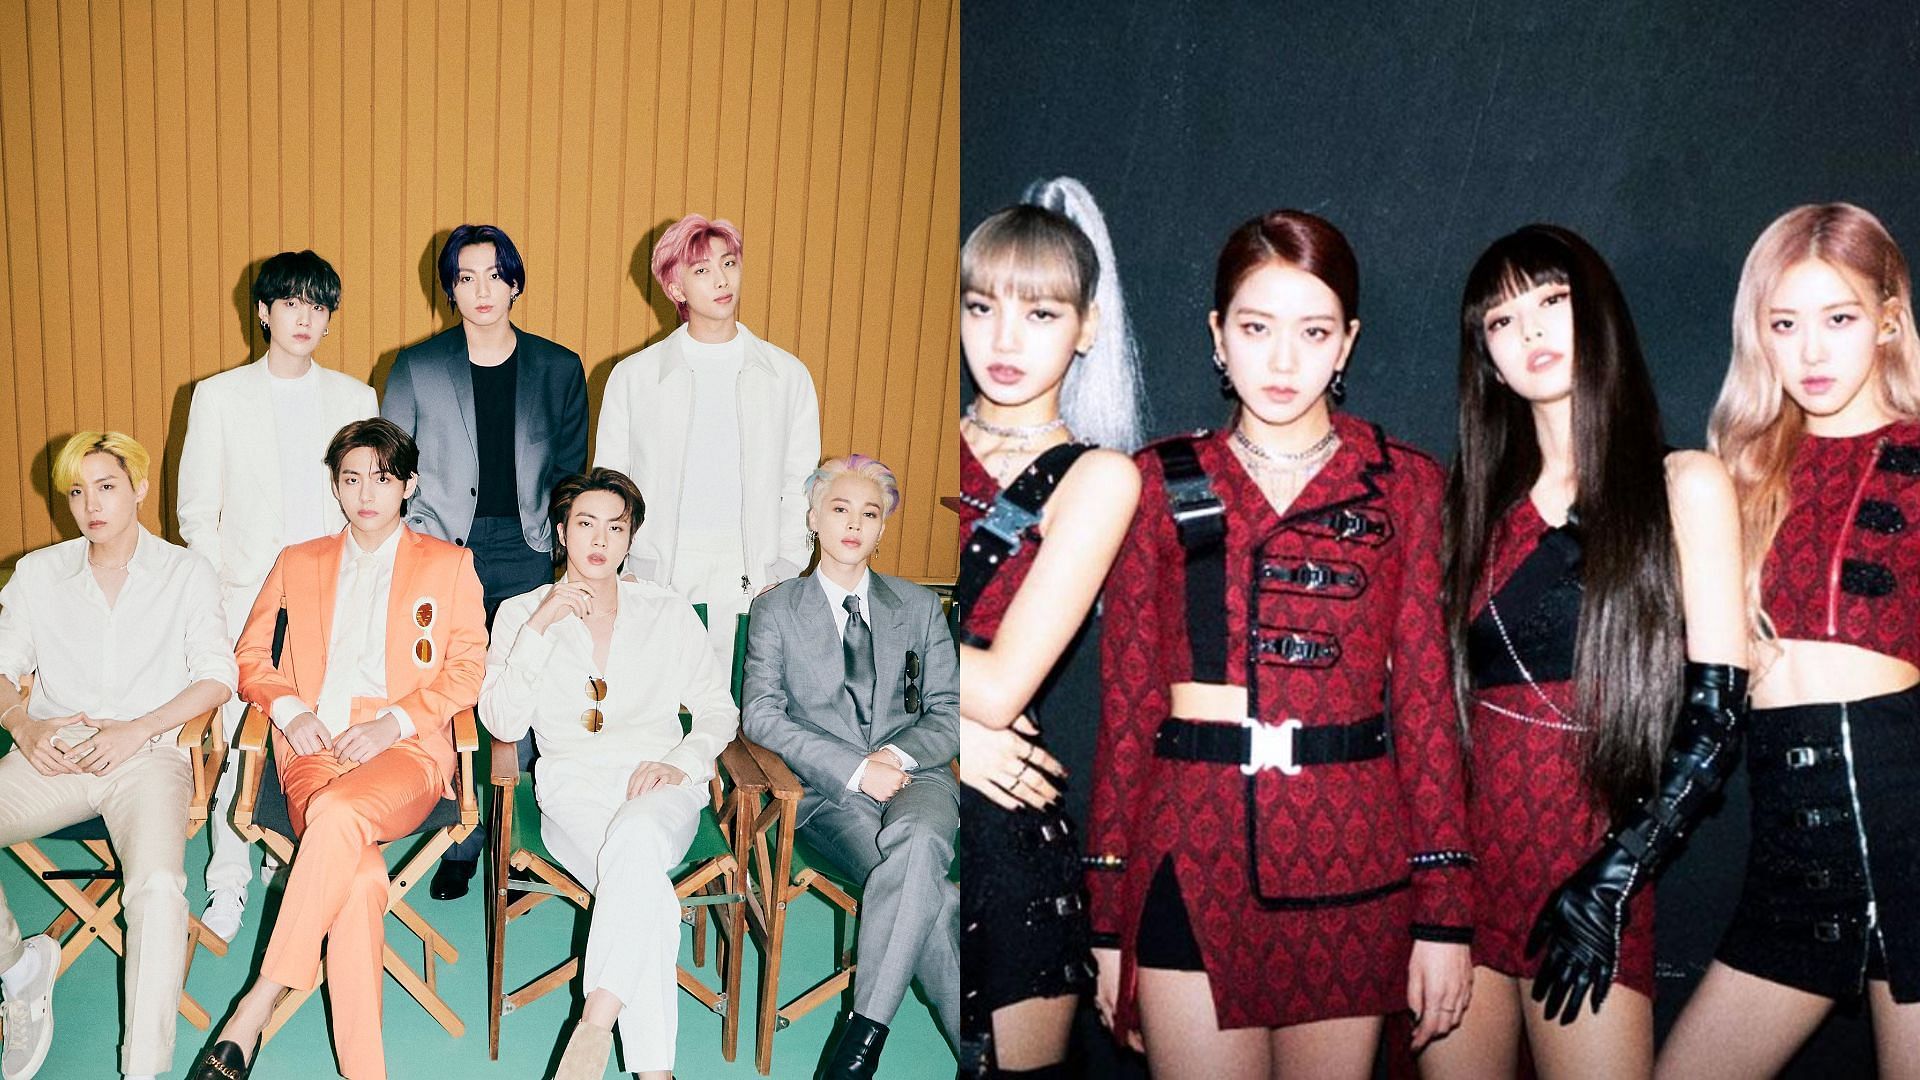 BTS and BLACKPINK members pose for the concept photo (Image via BIG HIT MUSIC and YG Entertainment)